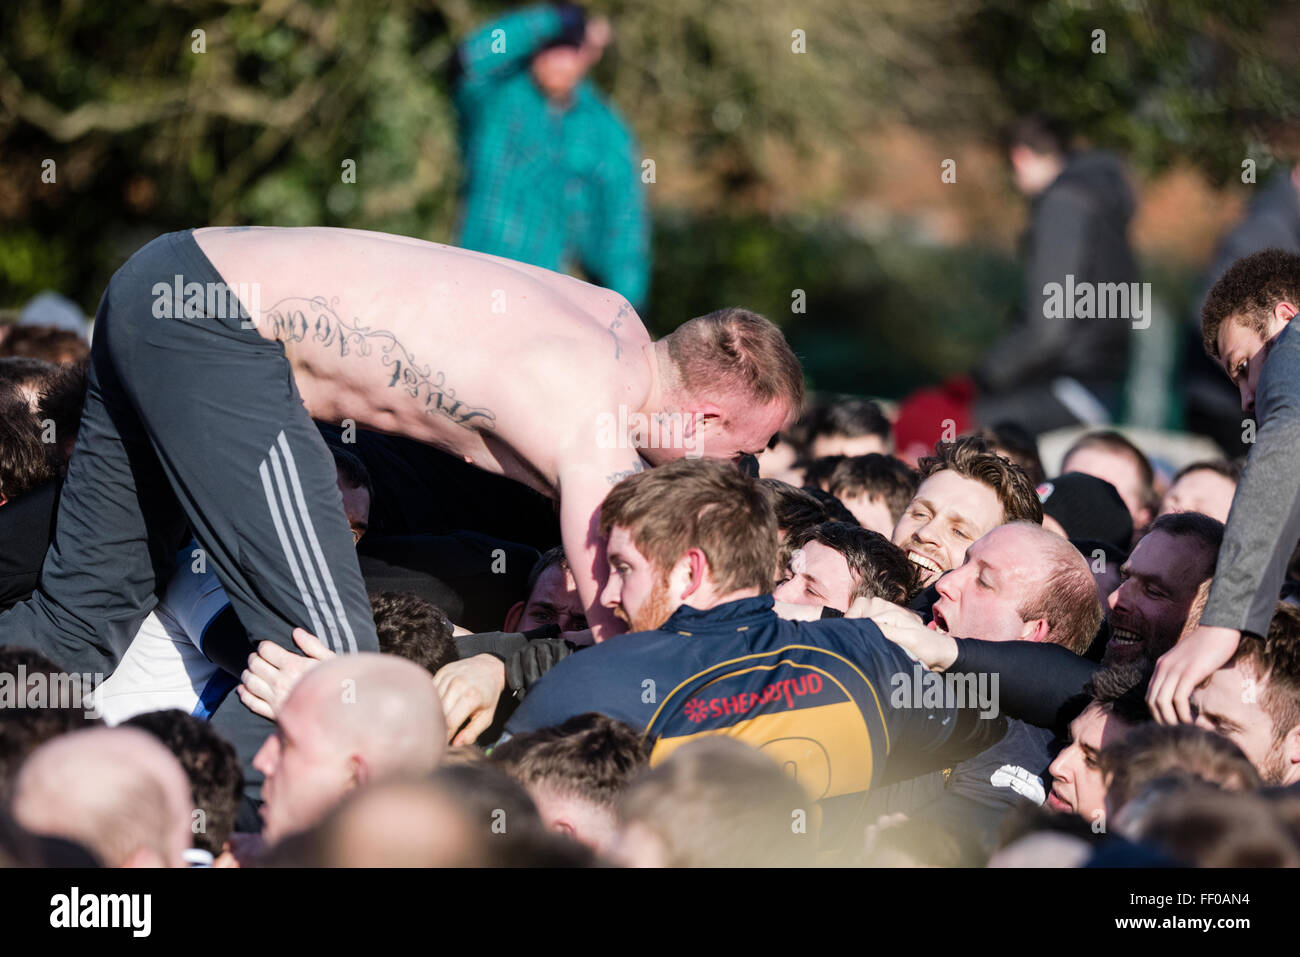 Ashbourne, Derbyshire, UK. 9th February 2016. Thousands fill the streets of Ashbourne for the annual 2 day royal Shrovetide football match Credit: © Ian Francis/Alamy Live News  Stock Photo